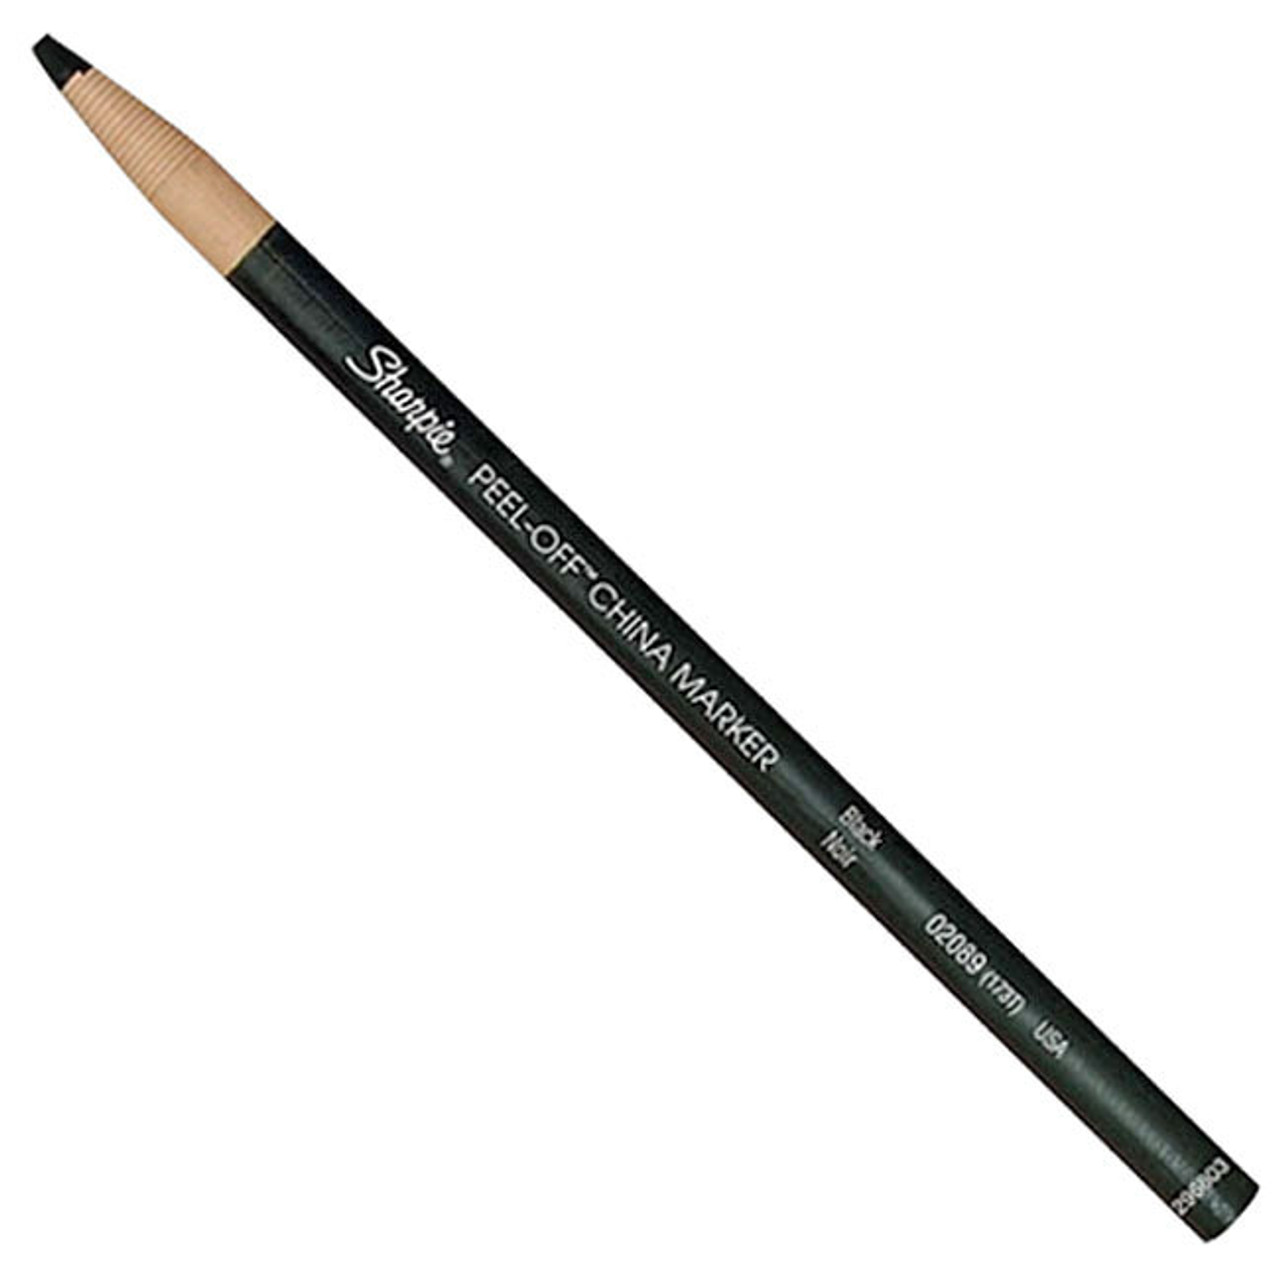  General Pencil 1240ABP China Marker Multi Purpose Grease  Pencil, Black/White, 2-Pack : Office Products